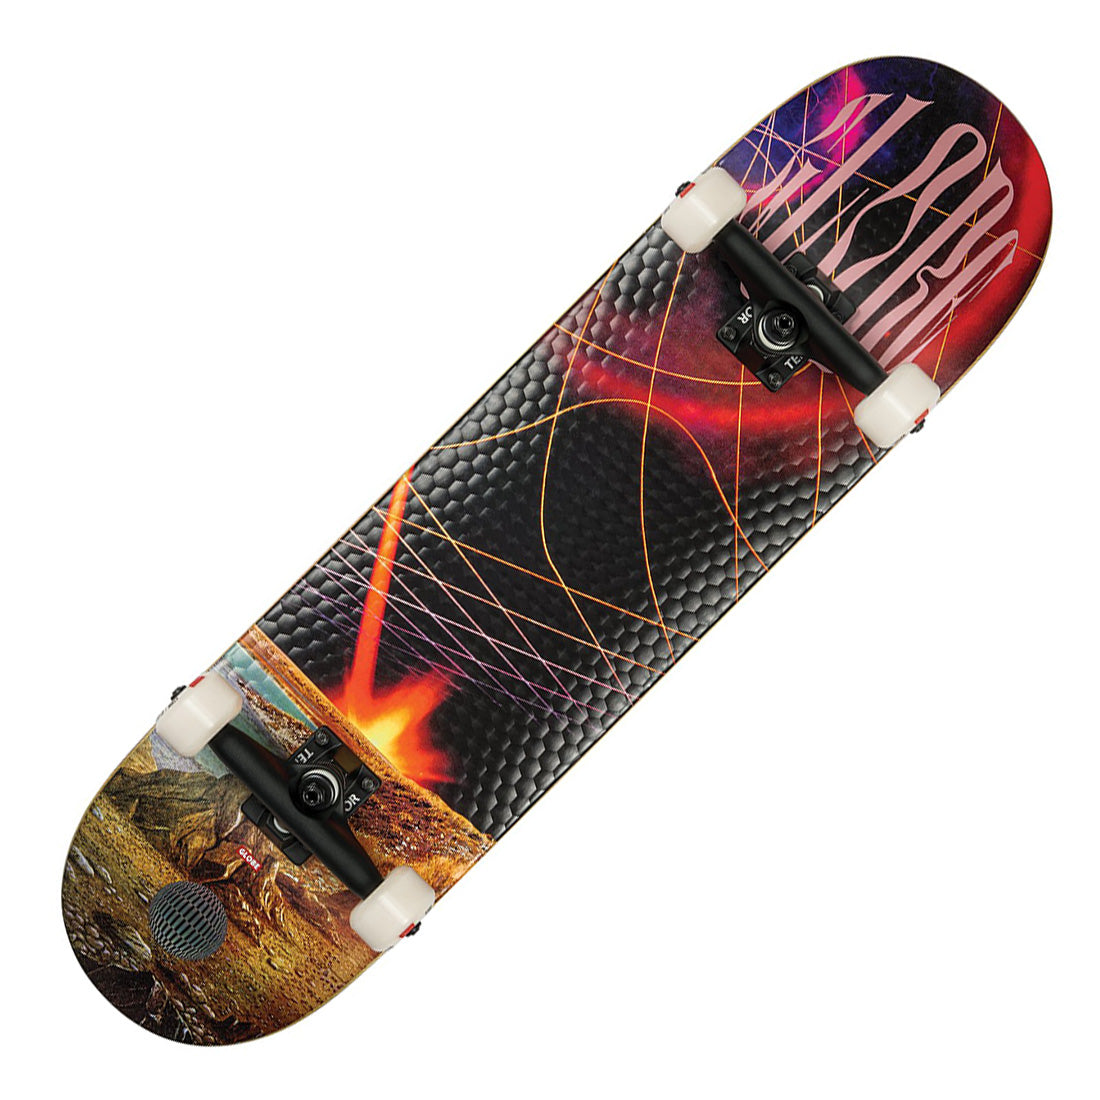 Globe G2 Rapid Space 8.25 Complete - Asteroid Skateboards